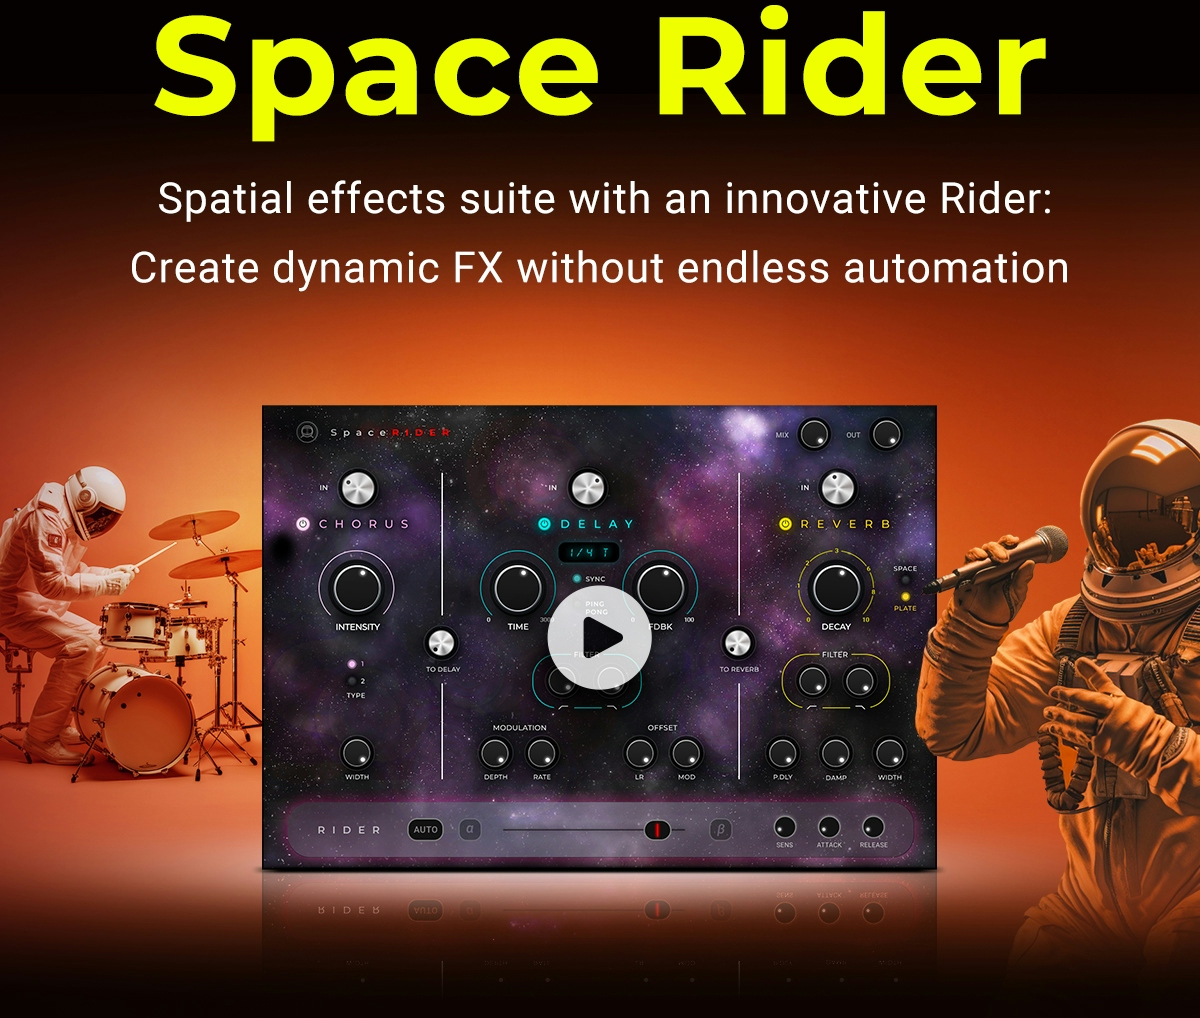 Space Rider - Create dynamic FX without endless automation